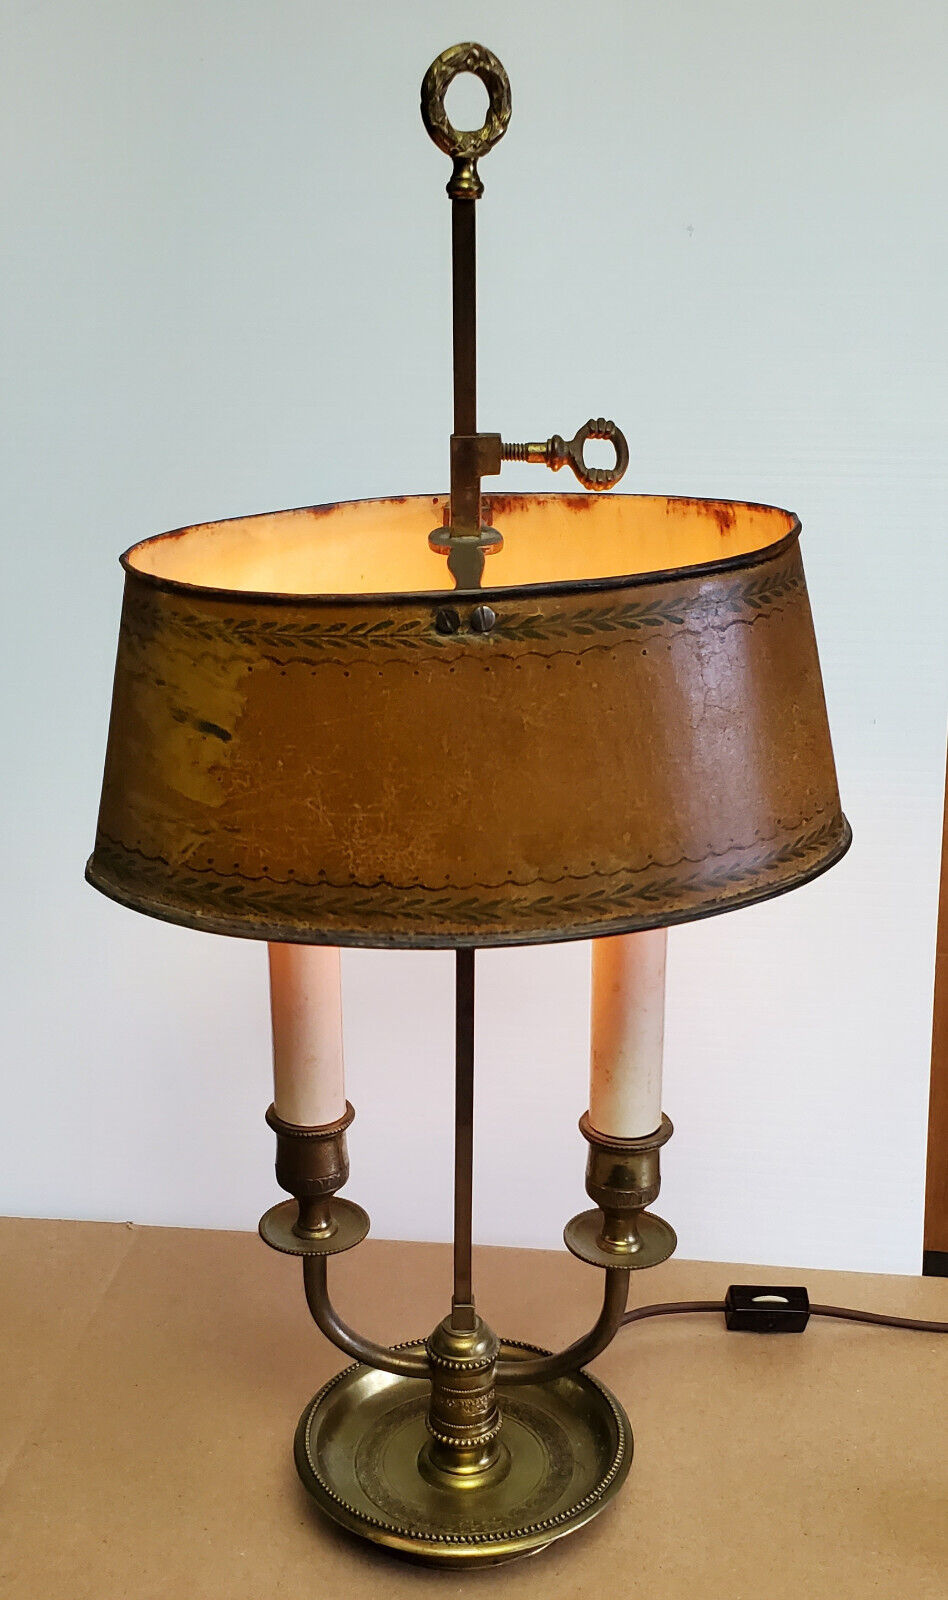 Antique Bronze French Bouillotte Lamp 2 Candle Budoir Table Lamp Tole Shade 